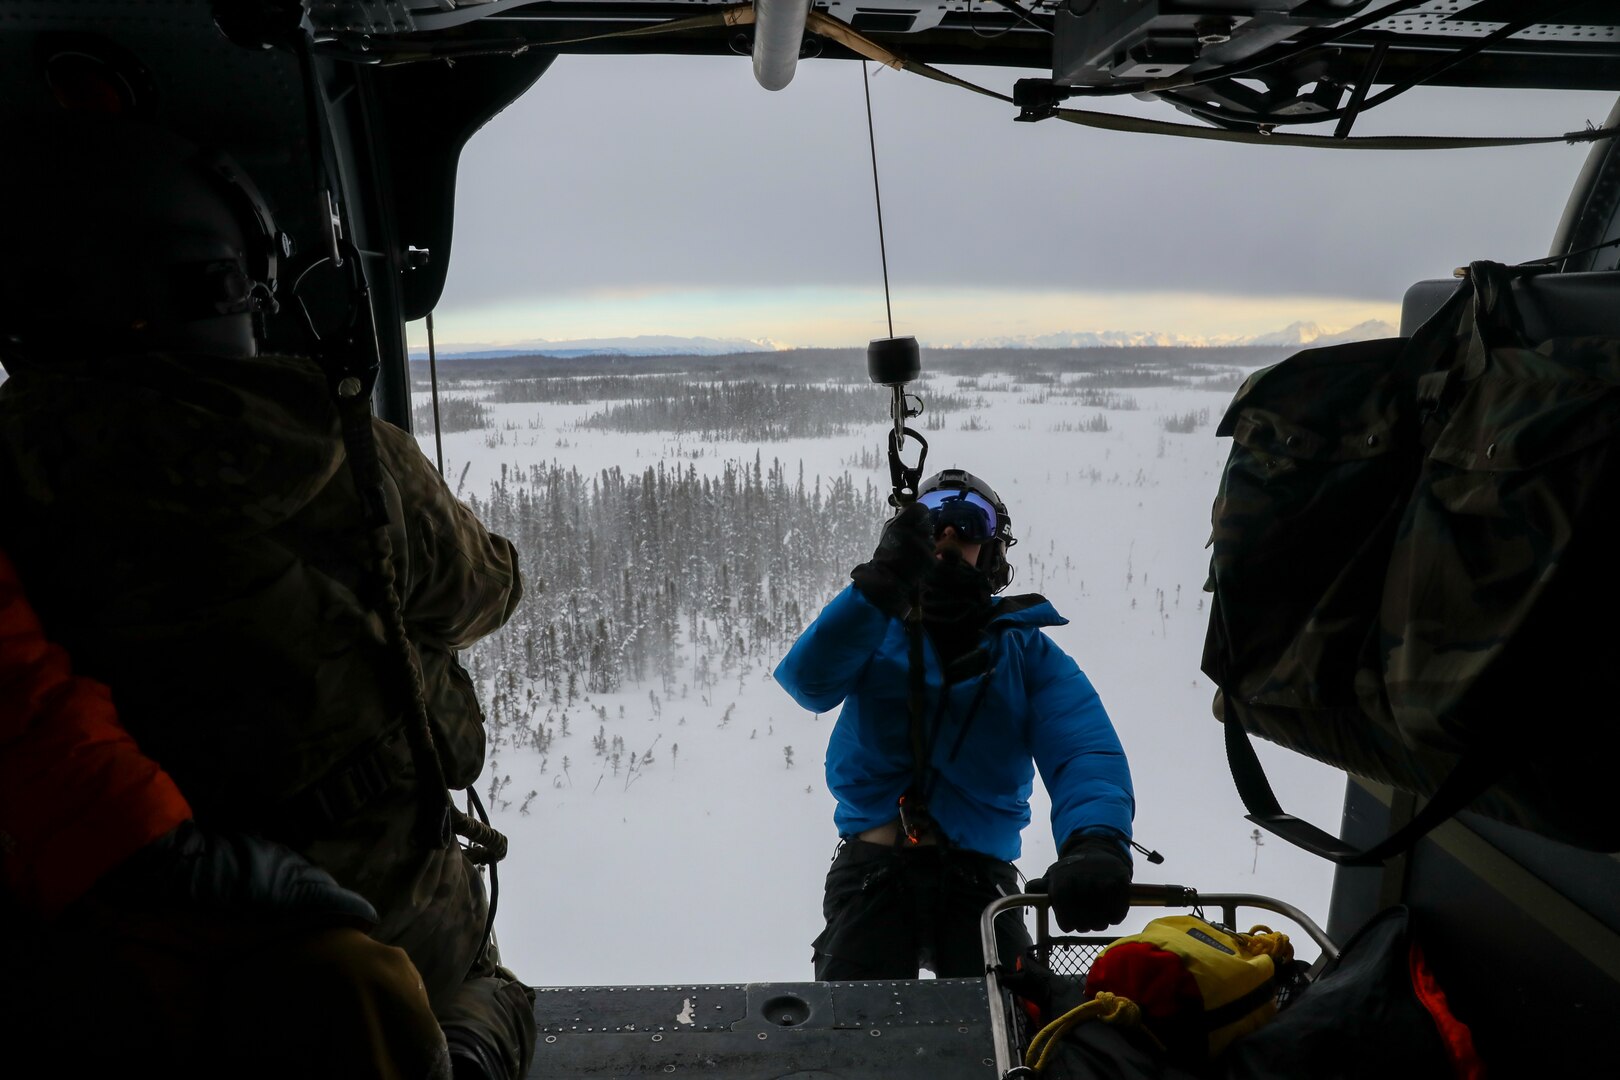 Alaska Air National Guard Staff Sgt. Kaden Wernofski, a 210th Rescue Squadron special missions aviator, operates the hoist to lift a 212th RQS pararescueman into an HH-60G Pave Hawk helicopter during a training mission over the Lower Susitna Valley near Anchorage, Alaska, Feb. 7, 2023. The HH-60G and rescue personnel along with a 211th RQS HC-130J Combat King II aircraft sit alert for the federal search and rescue mission across Alaska’s vast Arctic region.